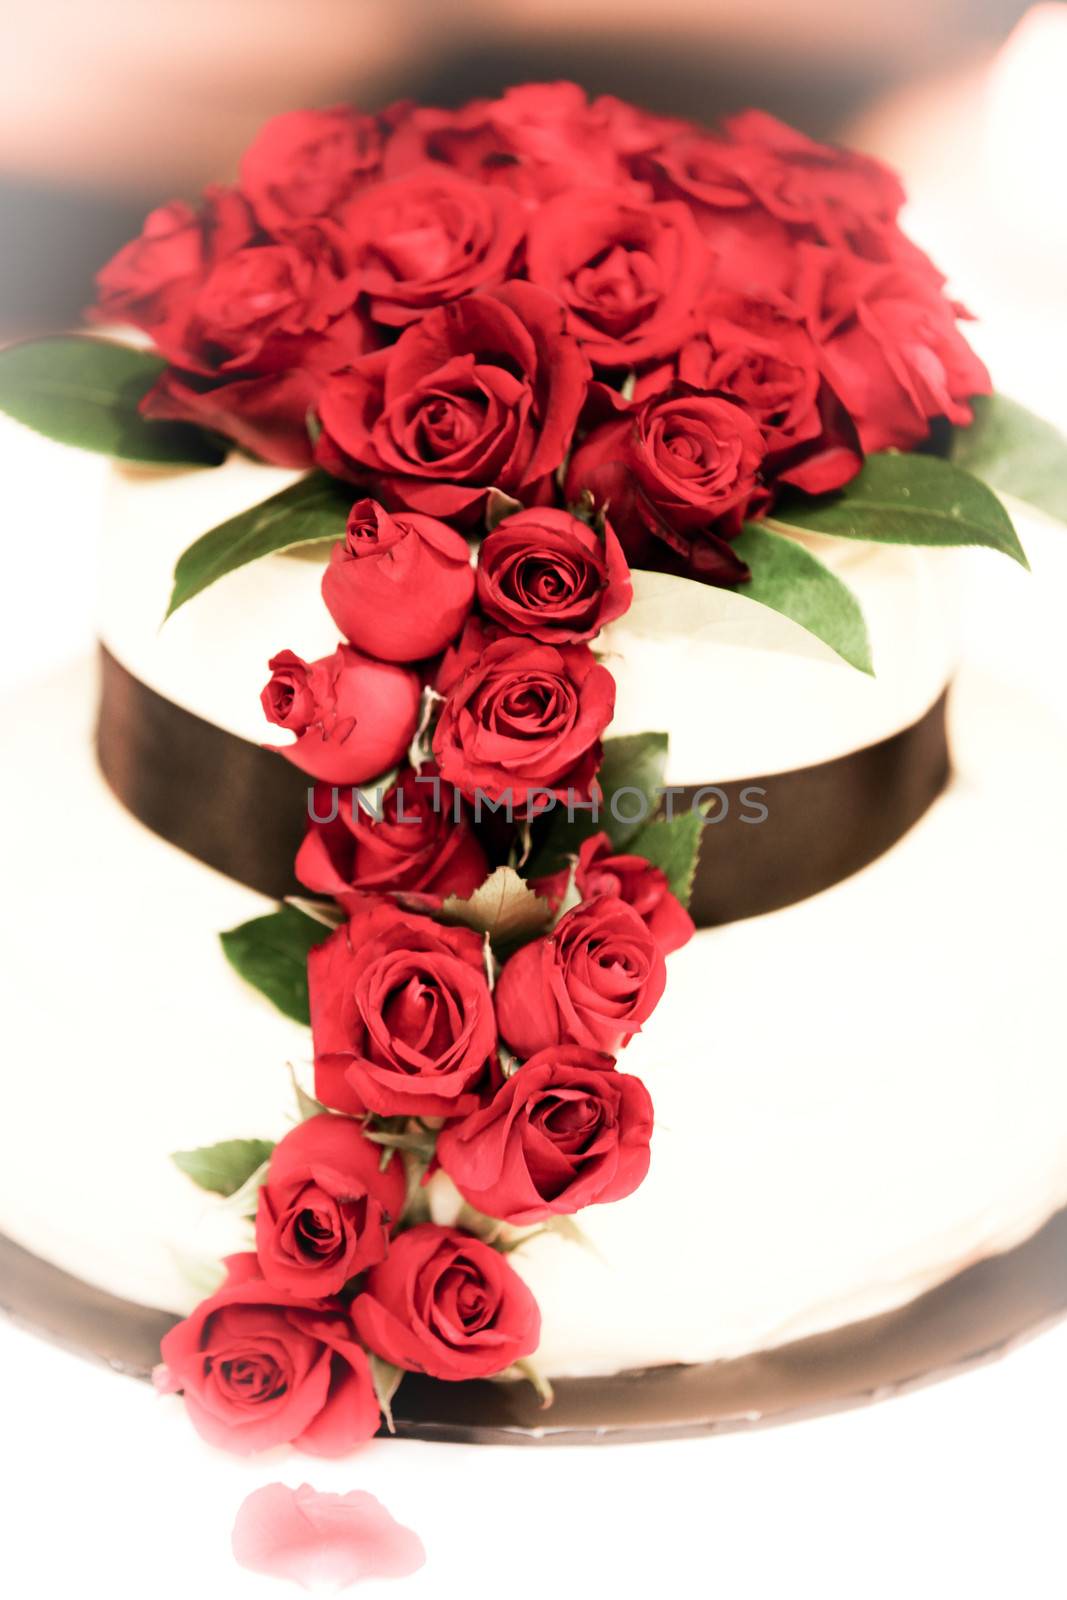 Beautifully decorated cake by jrstock